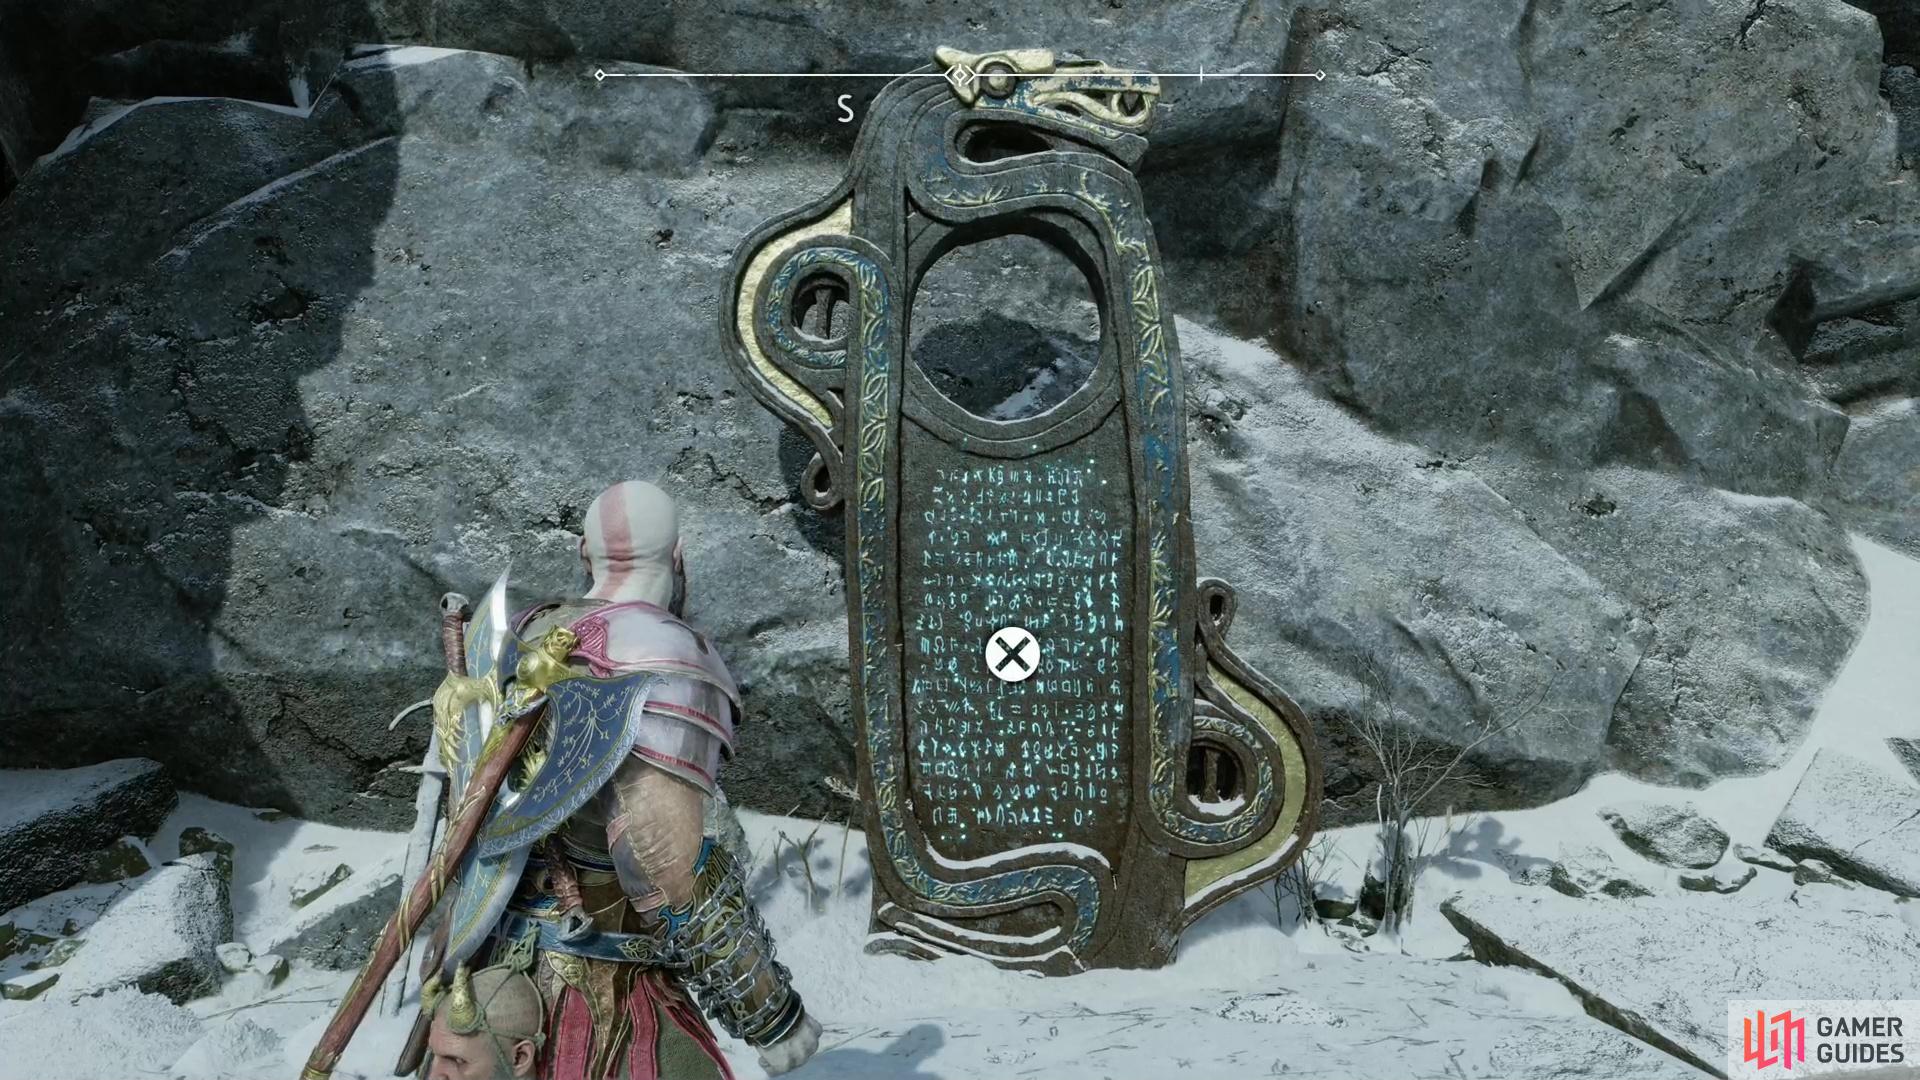 Turn a pulley and destroy a Wisp-spawning pillar, then search to the south to find the Lore Marker - Blodugr Steinn.